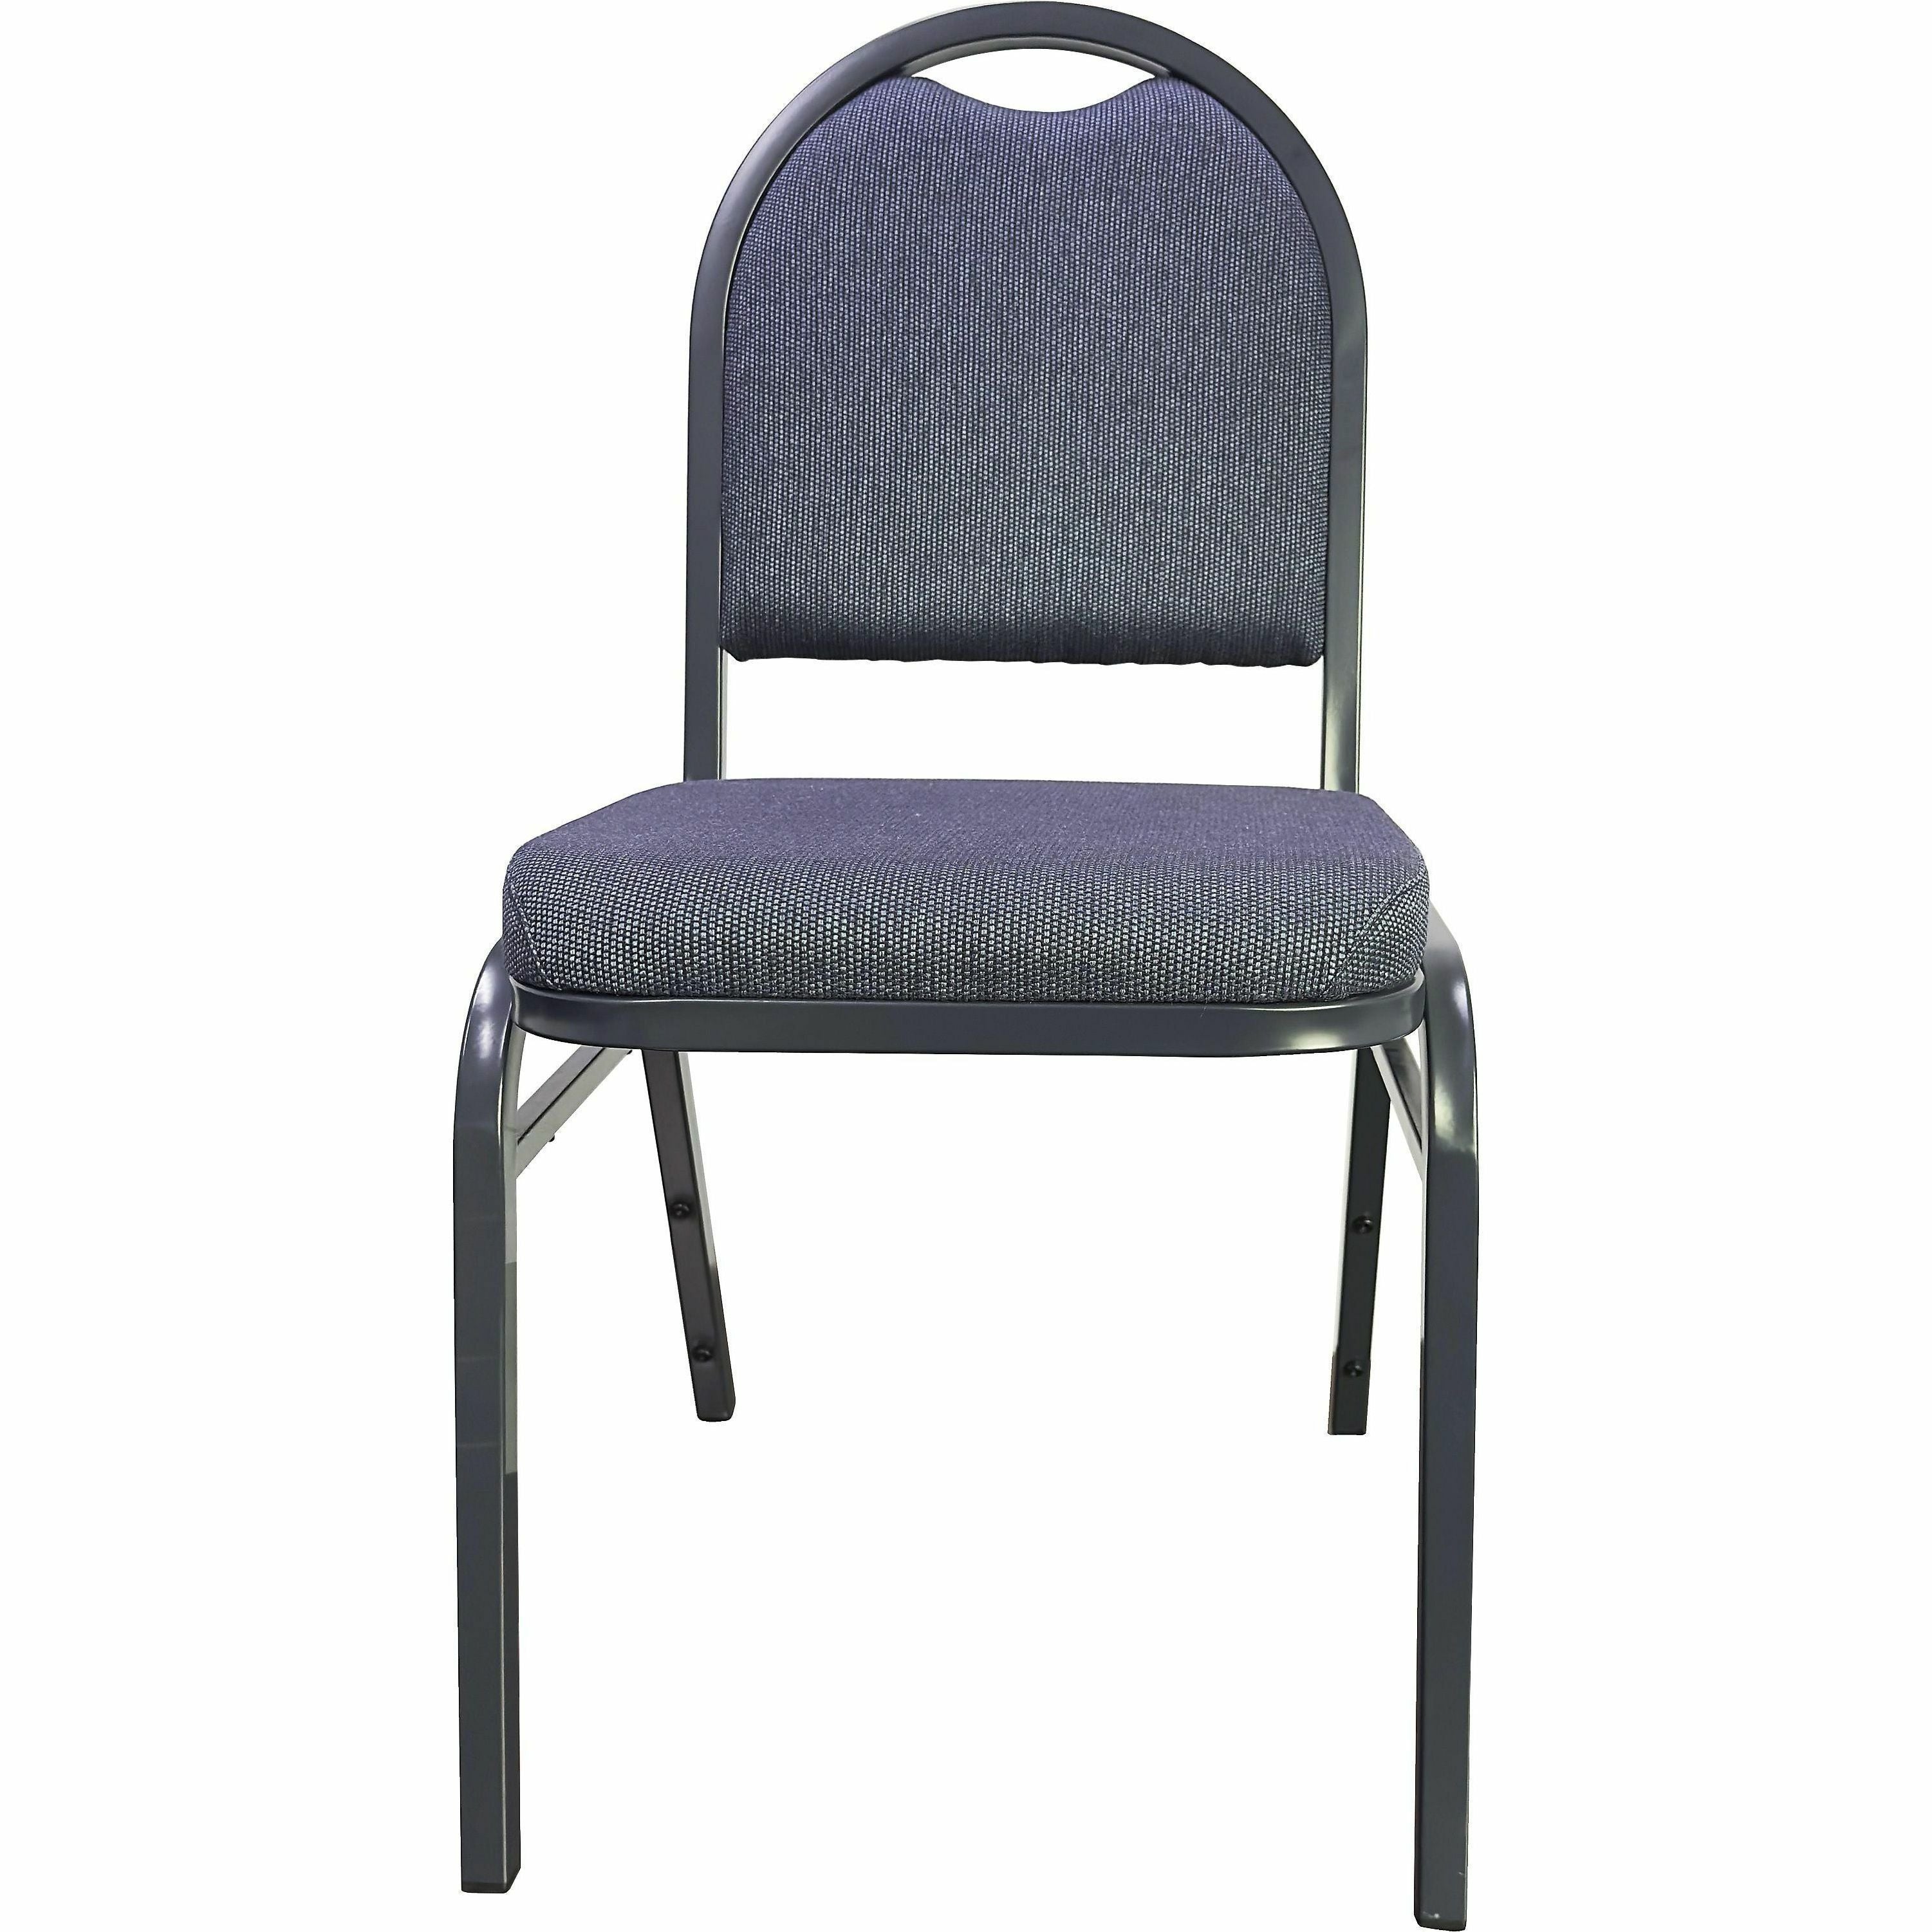 Lorell Round-Back Upholstered Stack Chairs - Blueberry, Black Fabric Seat - Charcoal Steel Frame - Blue, Black - 4 / Carton - 